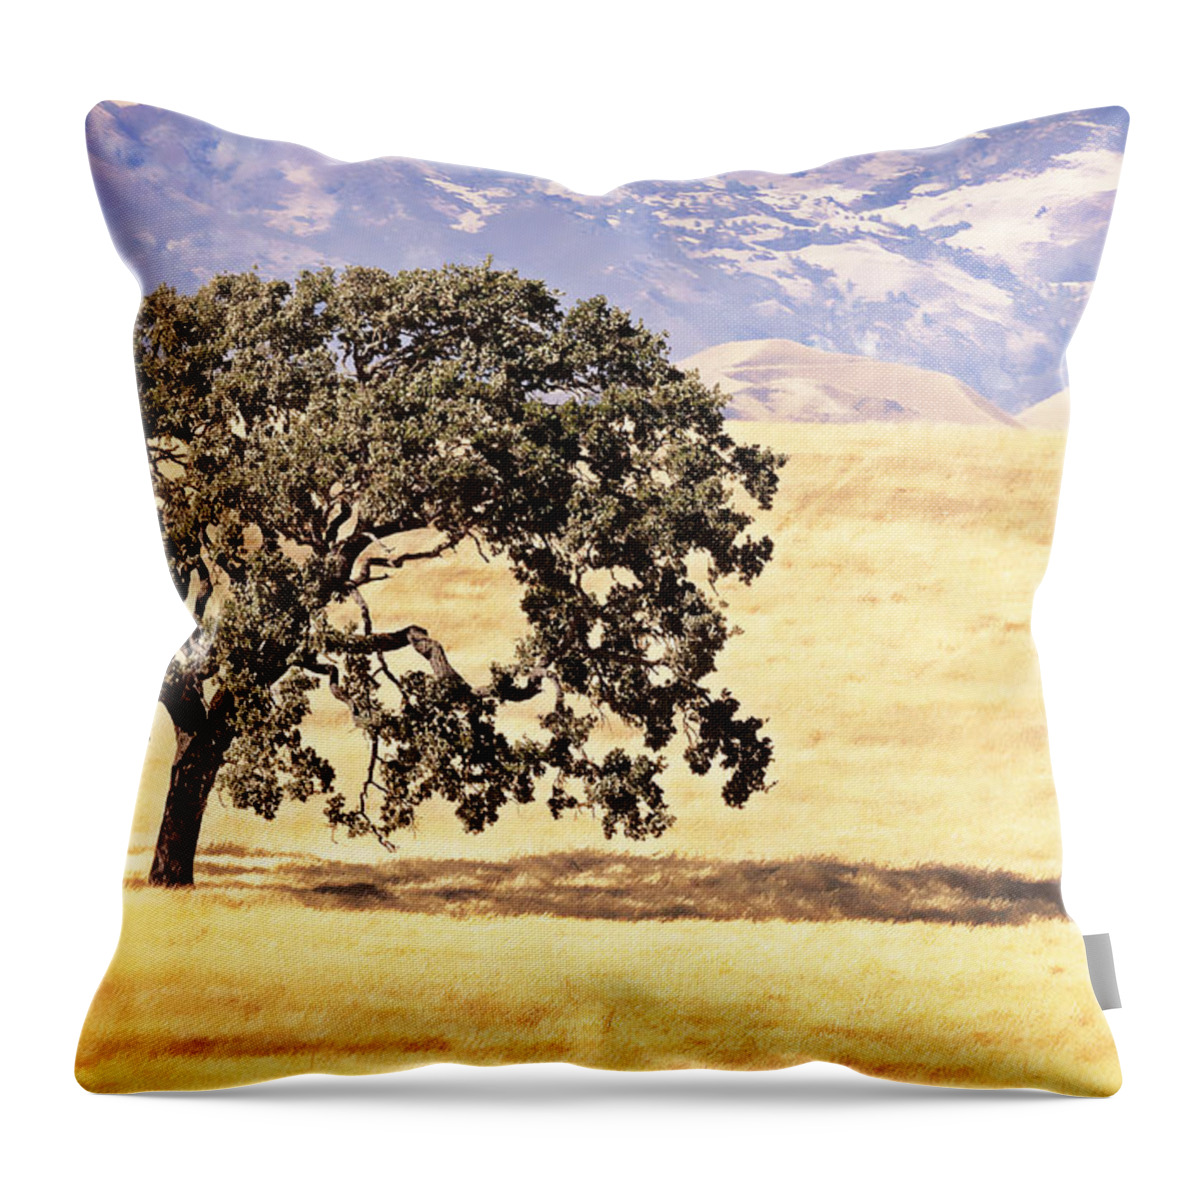 Lone Tree Throw Pillow featuring the photograph Lone Tree by Caitlyn Grasso